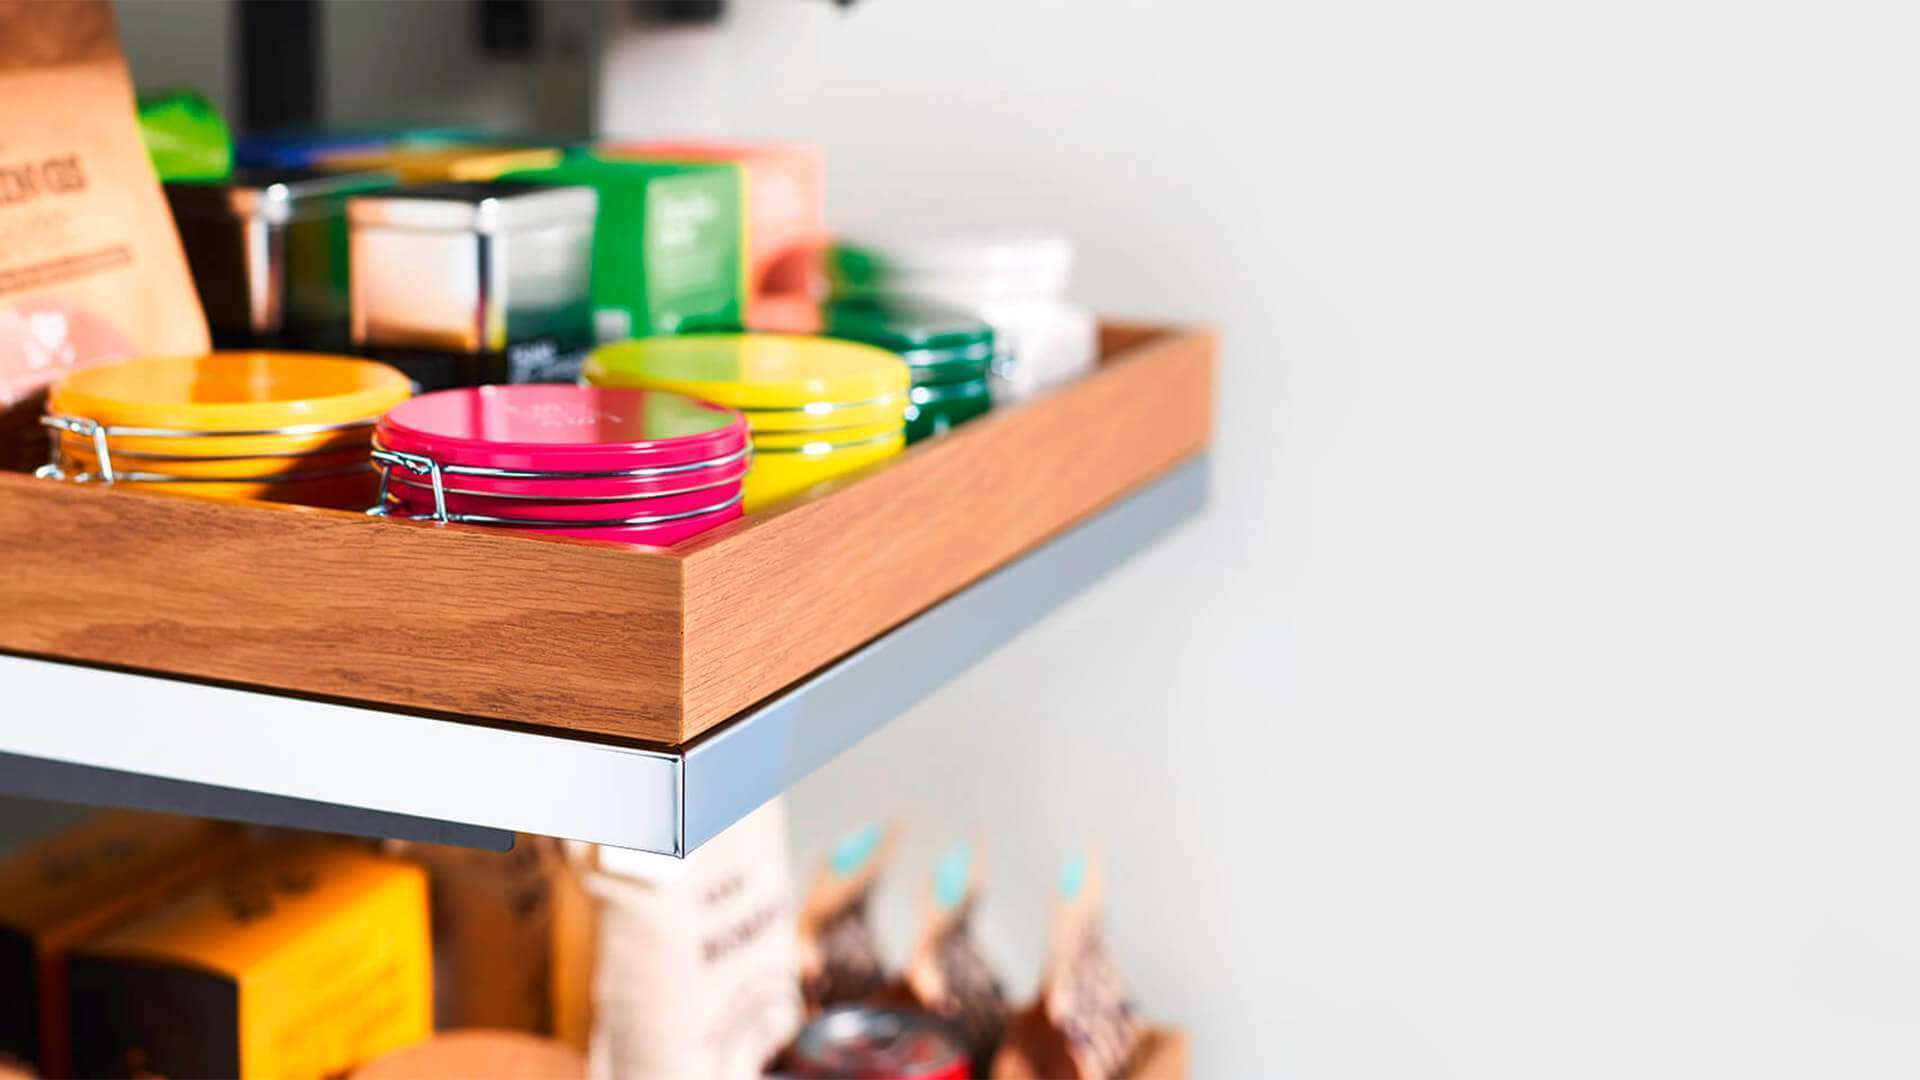 5 Kitchen Storage Solutions To Make Your Life Easy - Kesseboehmer